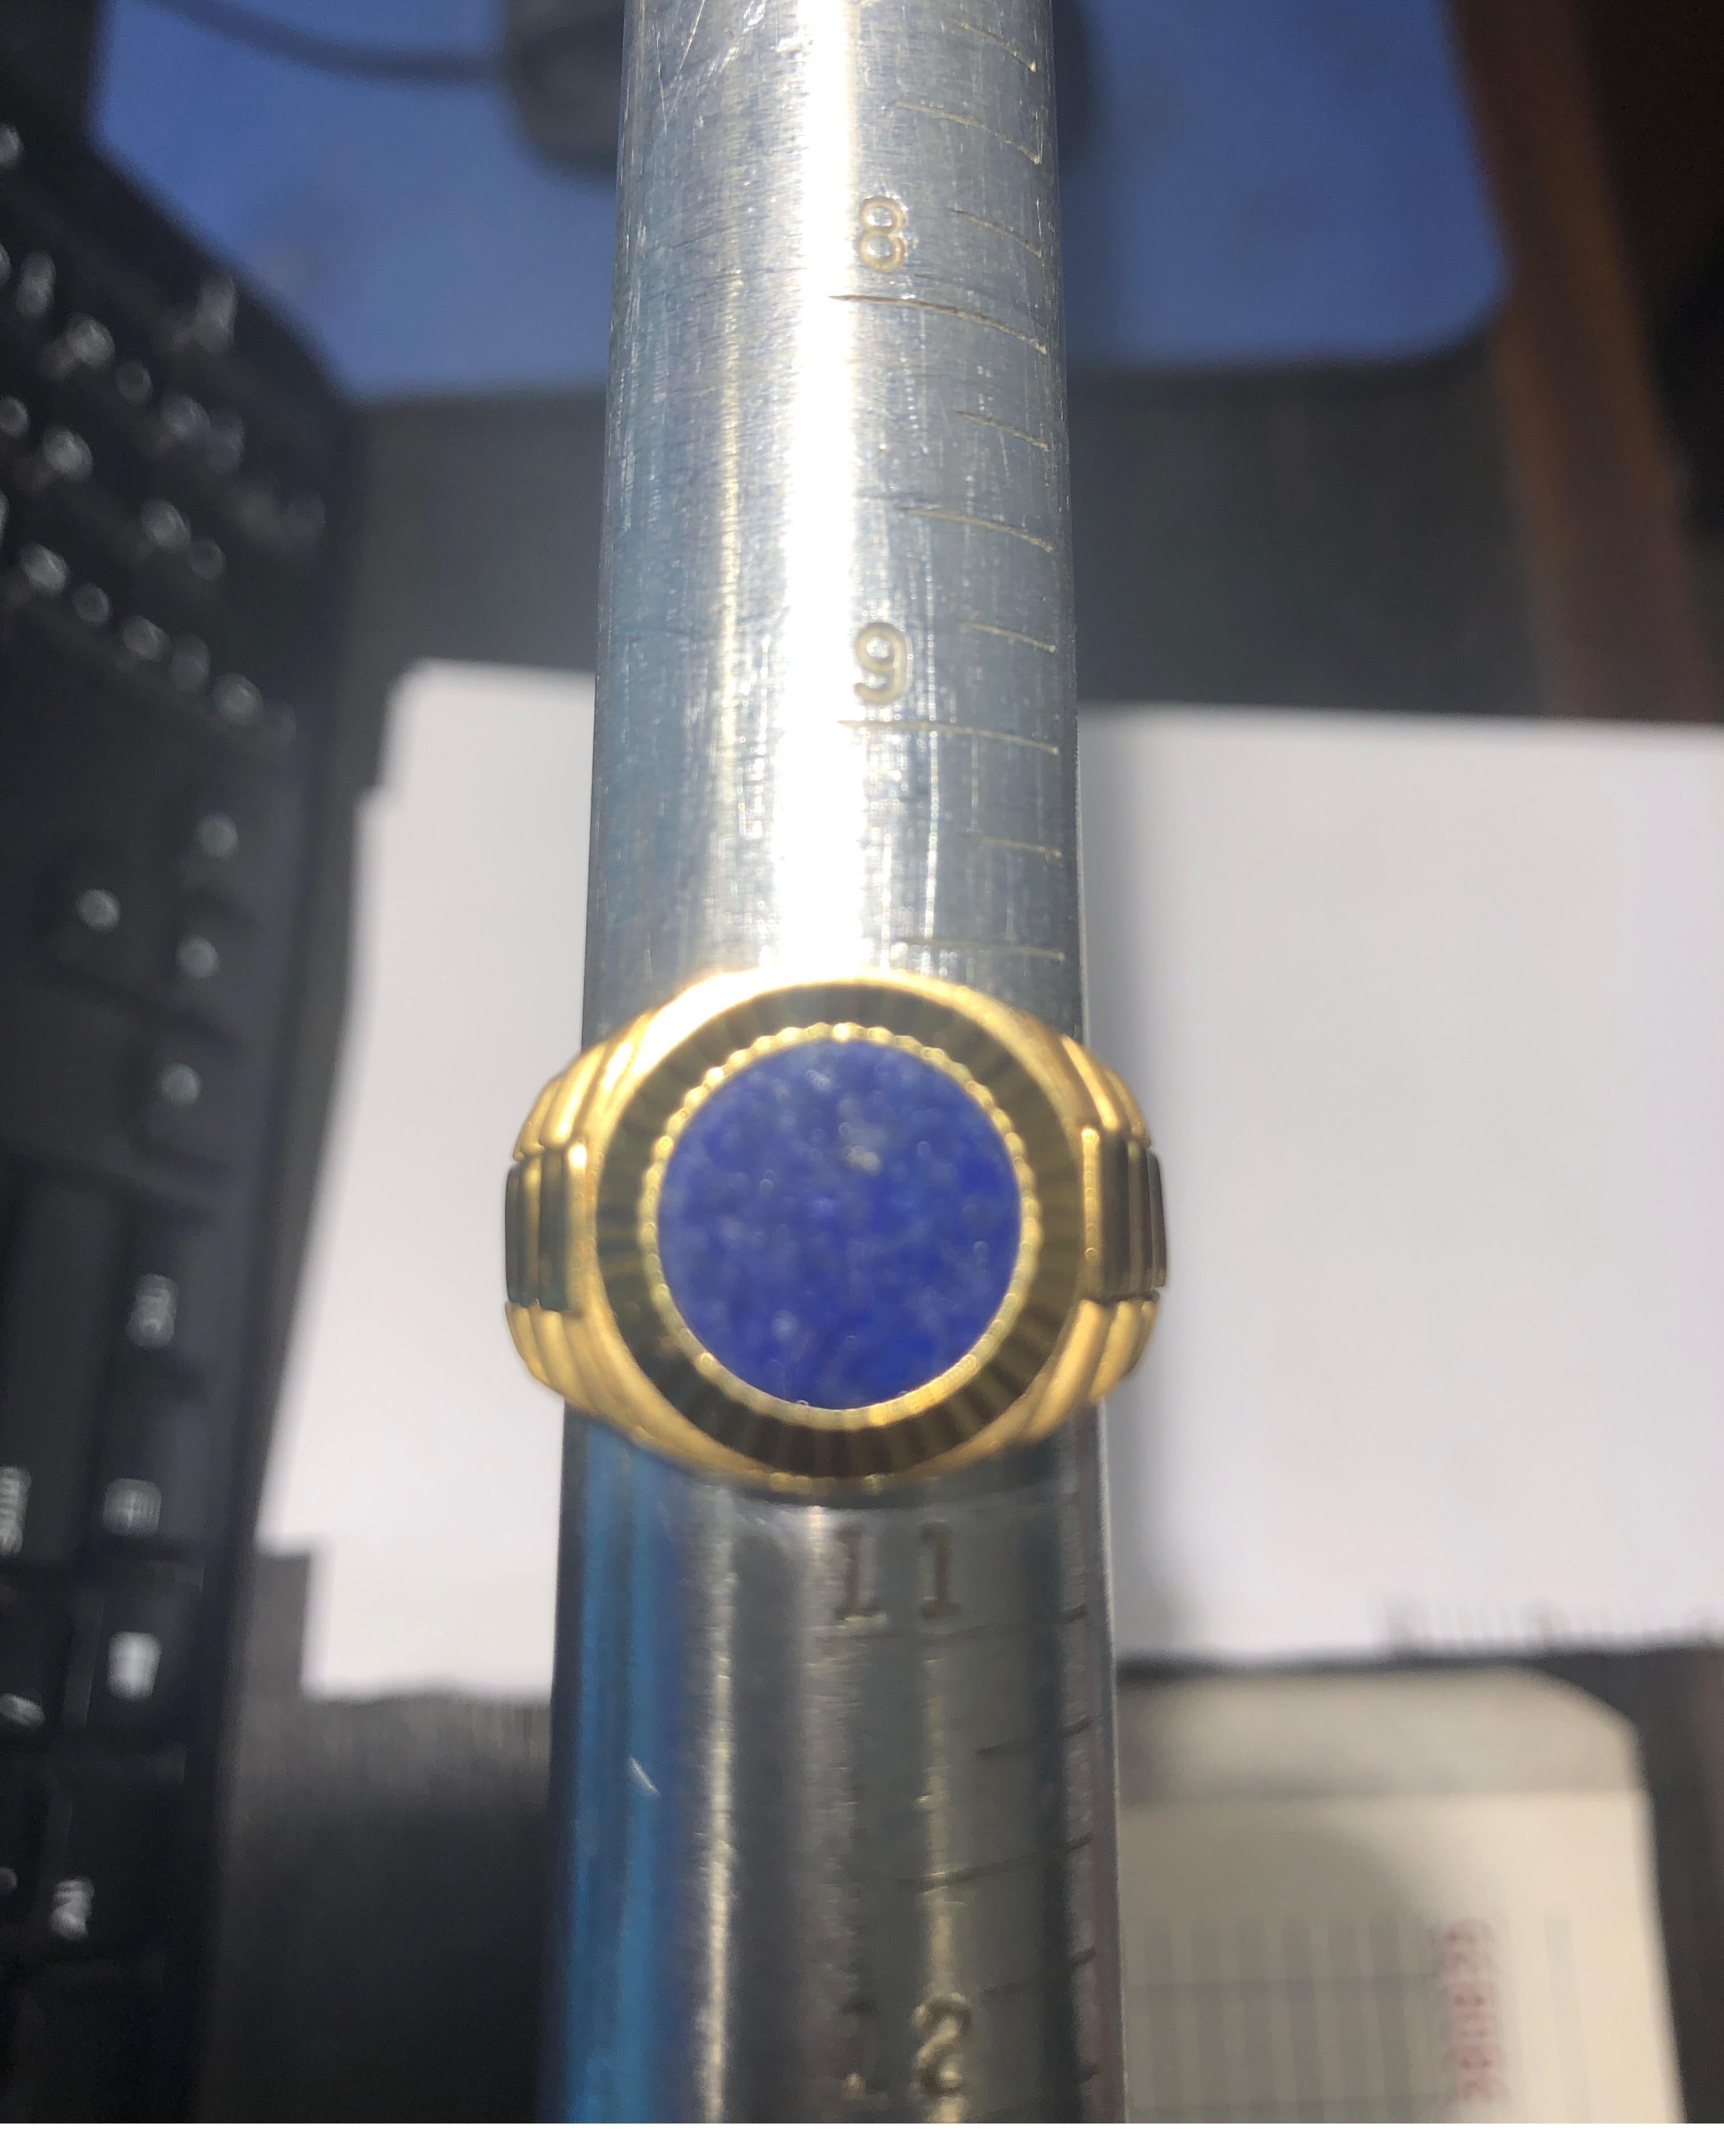 Man’s 18K yellow gold matte finish and high polish finish ring with blue lapis in center. Weighs 16 grams
Finger size 10.25. May be sized
Original retail $2850
Fun I I’ll b    
